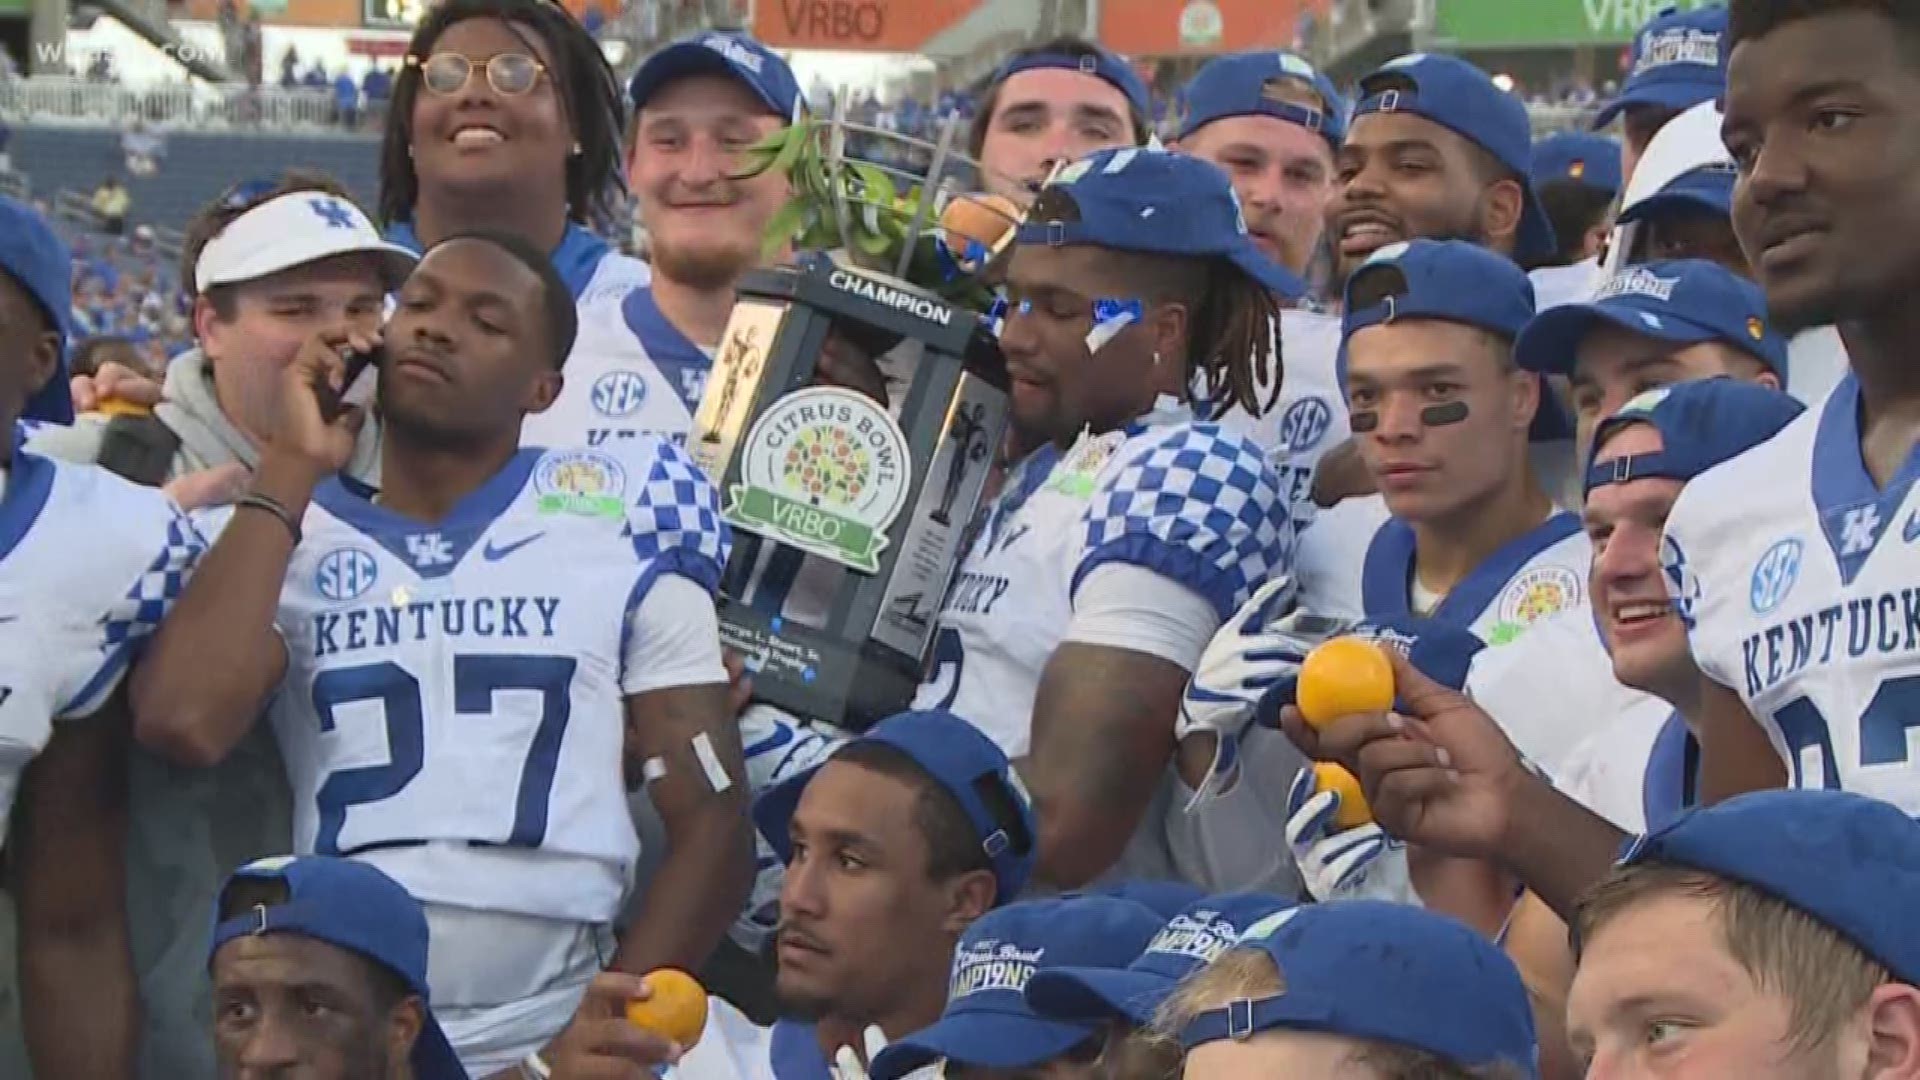 Kentucky Football is coming off one of its most successful seasons of all time. Fans are expecting more this season, while critics are predicting a big drop off.